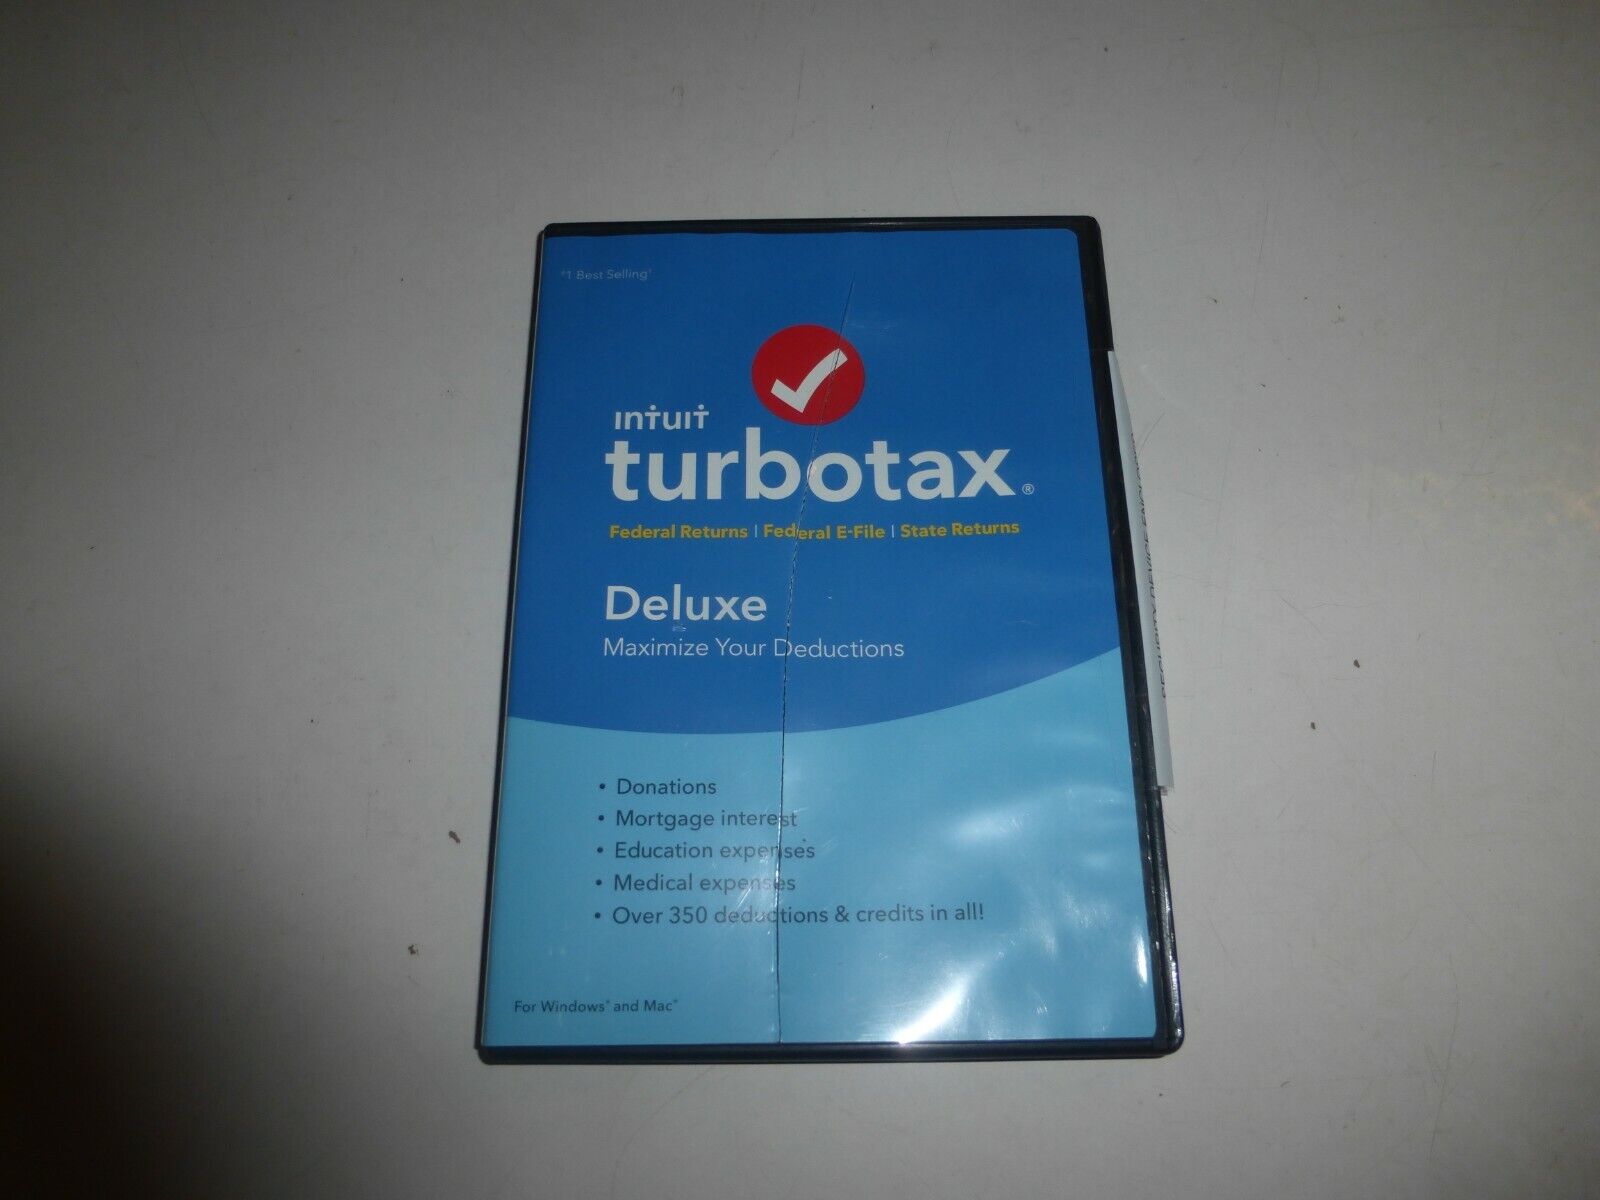 2018  Turbo tax Deluxe 2018, Federal,Federal  E-File and State  B44